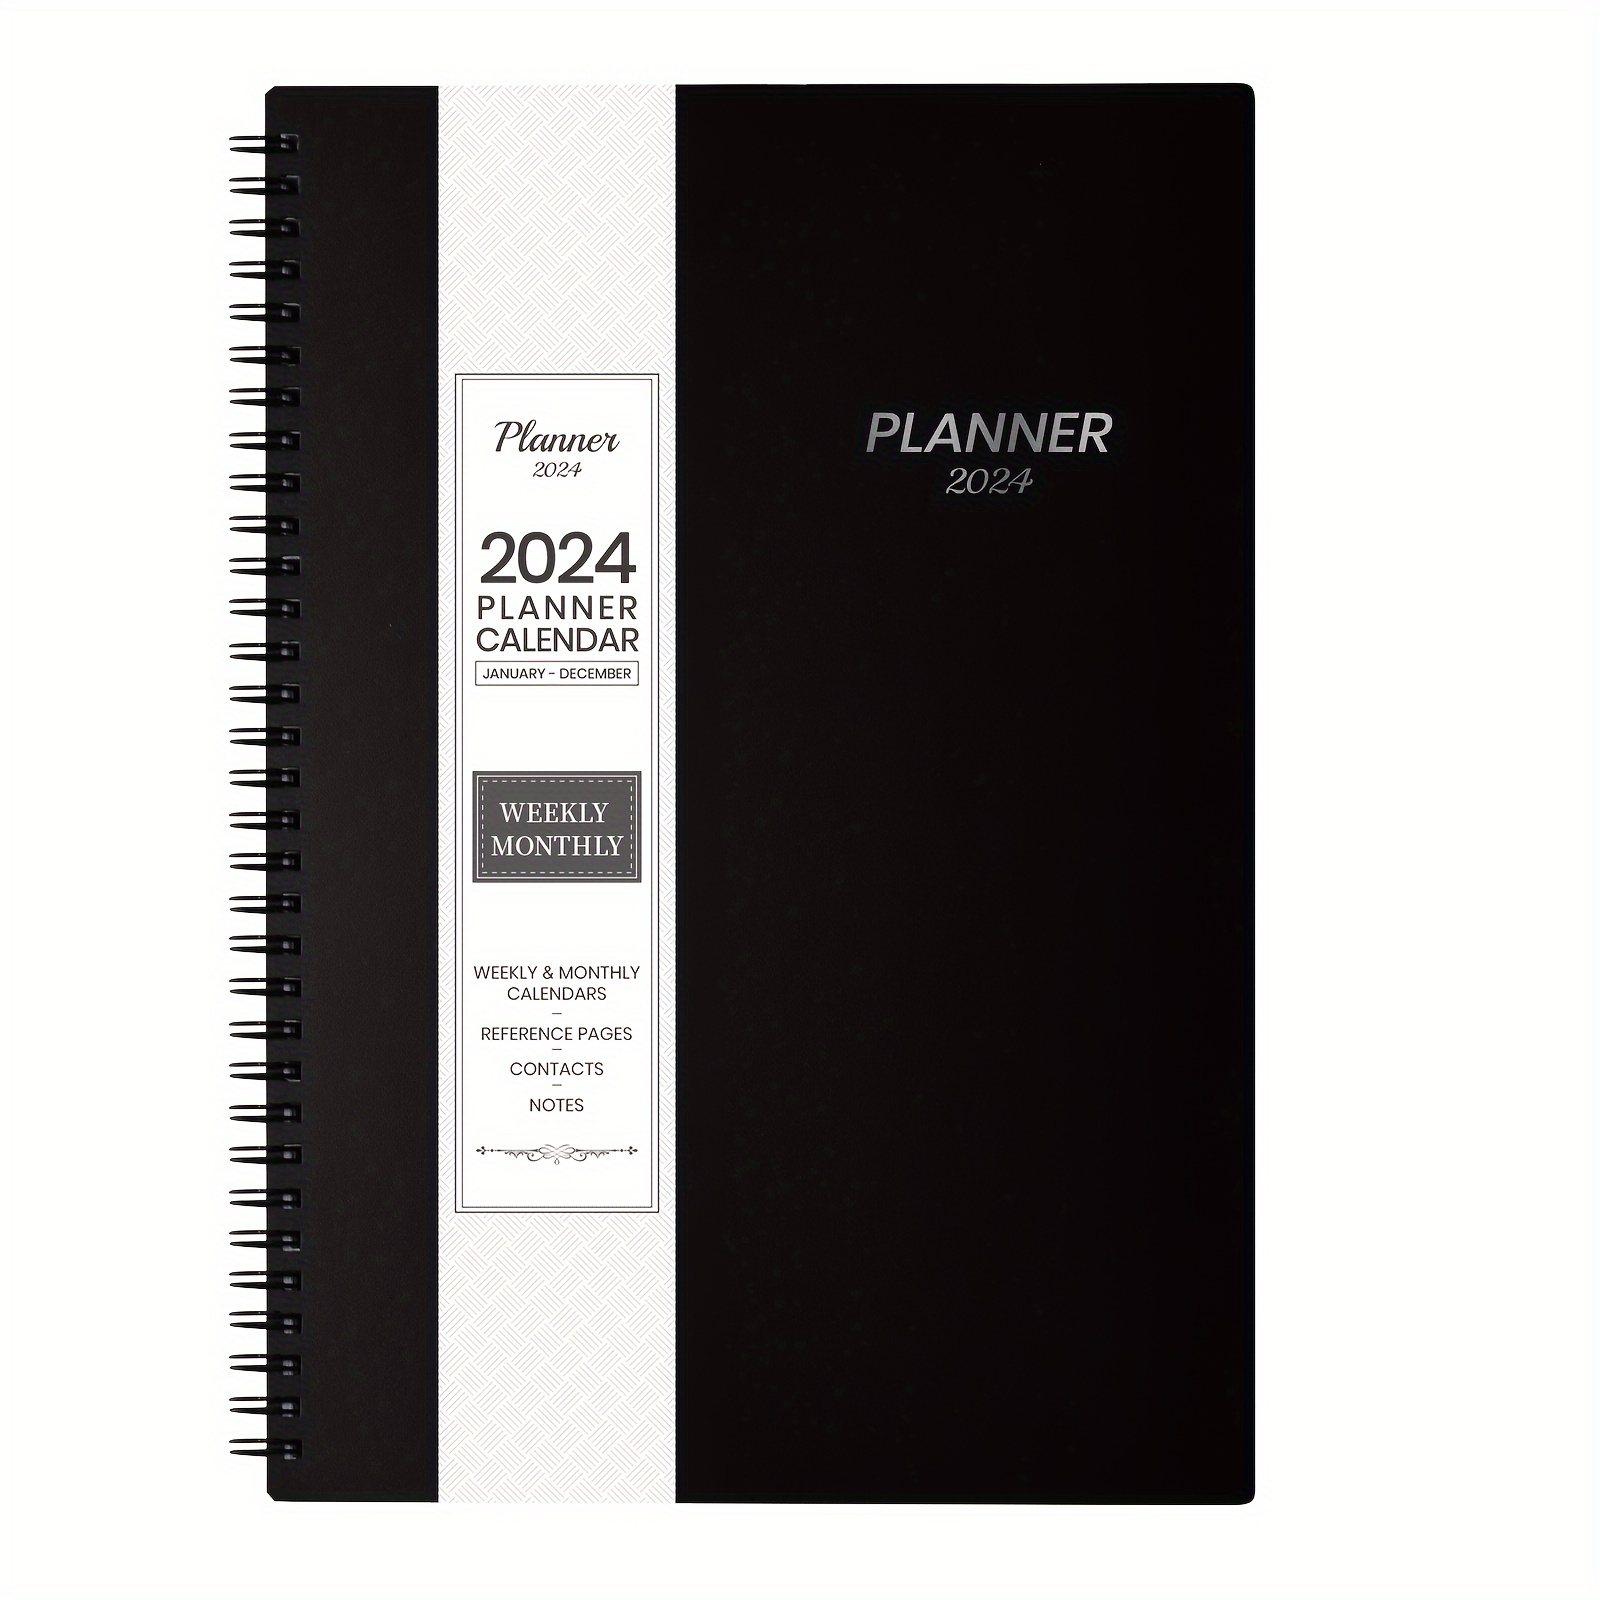 Daily Planner Undated Minimalism Planner 52 Sheets Academic Agenda With To  Do List, Follow Up, Appointment, Schedule And Notes, 100gsm Paper